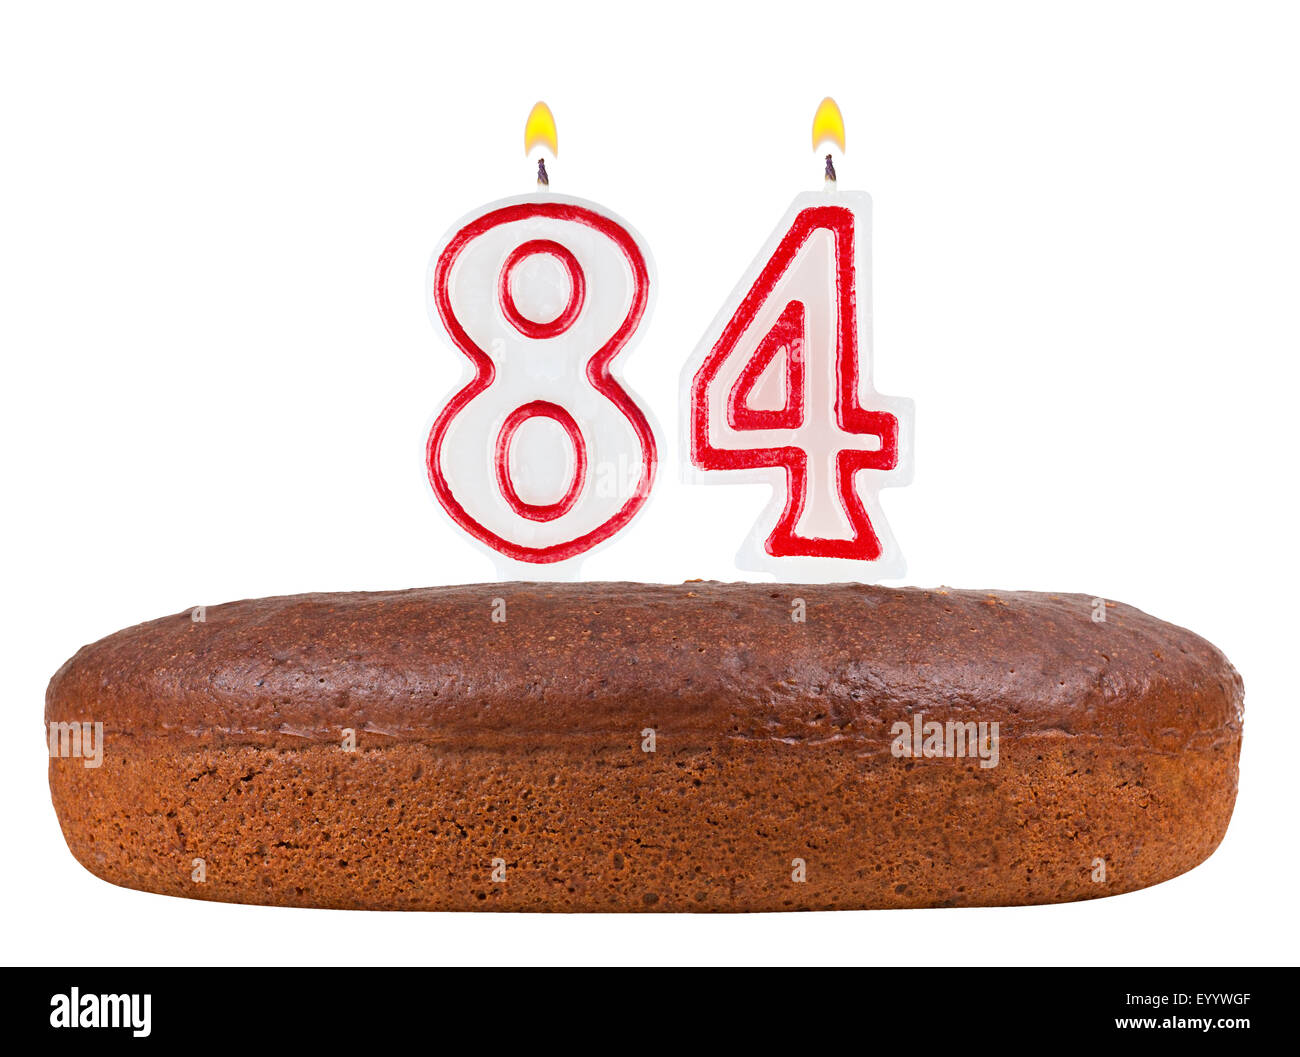 birthday cake with candles number 84 isolated on white background Stock Photo